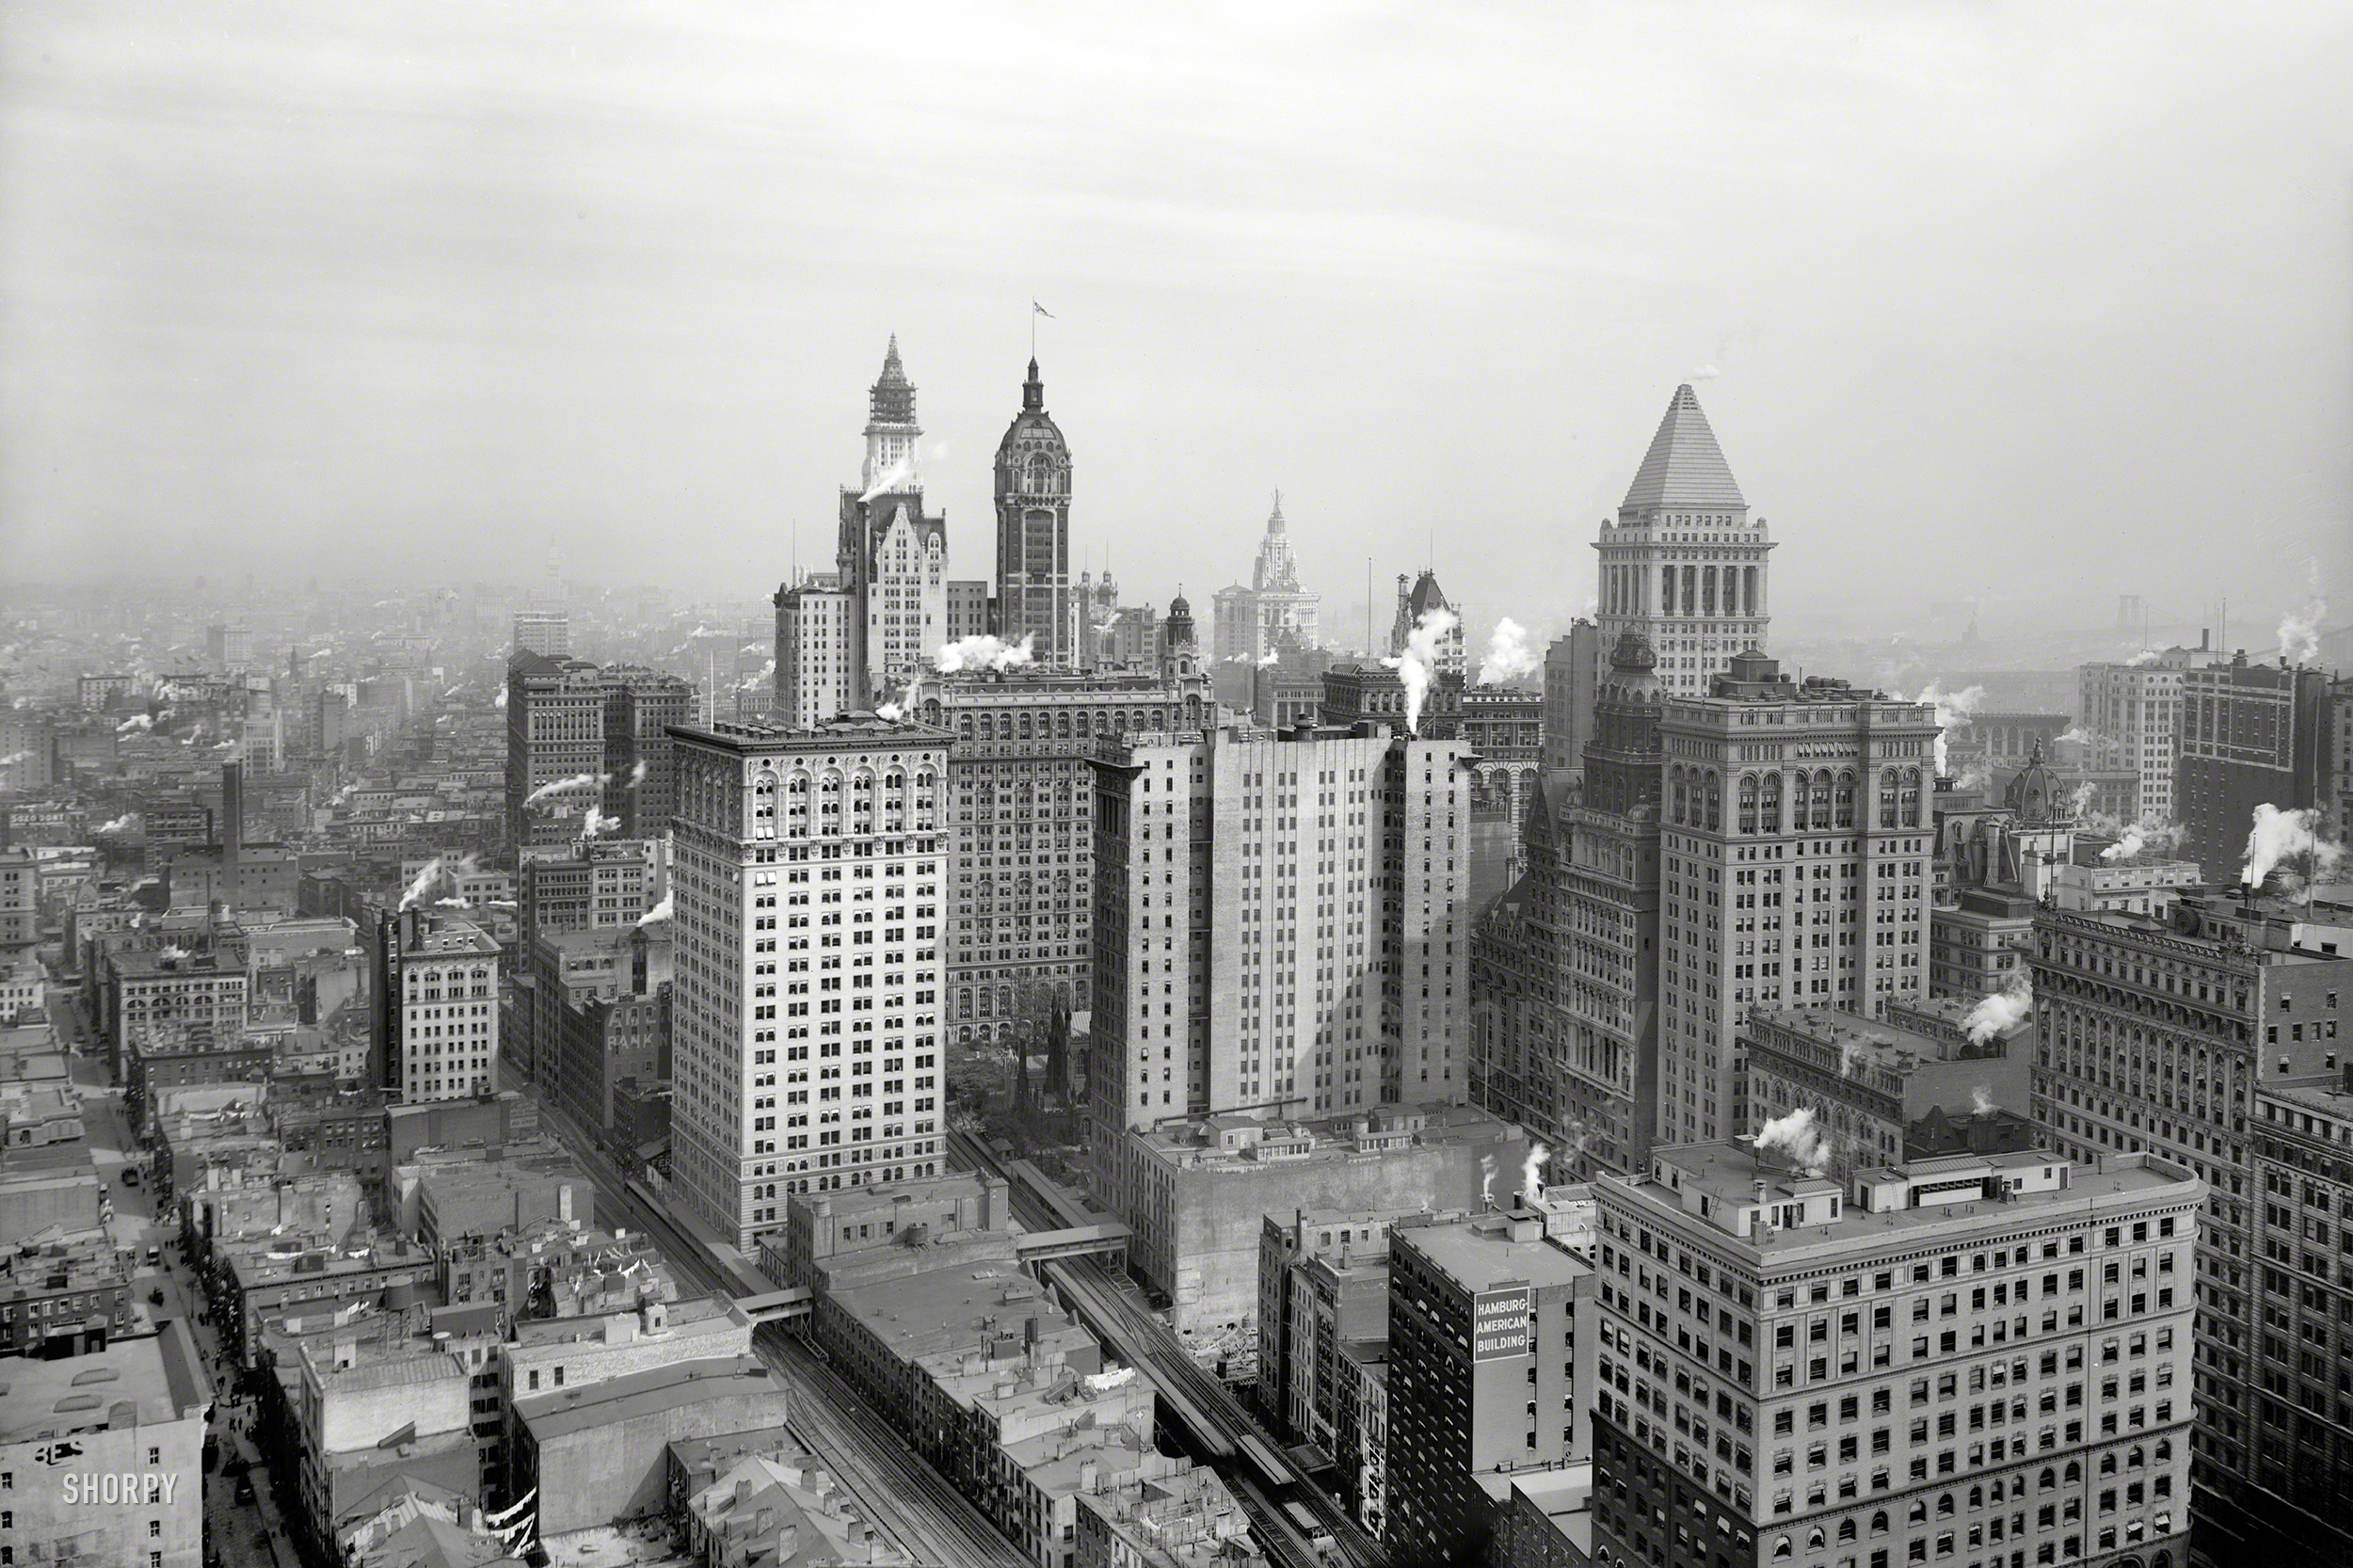 New York circa 1912. "The big buildings of Lower Manhattan." Landmark skyscrapers in this view (from where?) include the Woolworth (left) and Municipal buildings nearing completion, as well as the Singer and Bankers Trust towers. Panorama made from two 8x10 inch glass negatives. View full size.